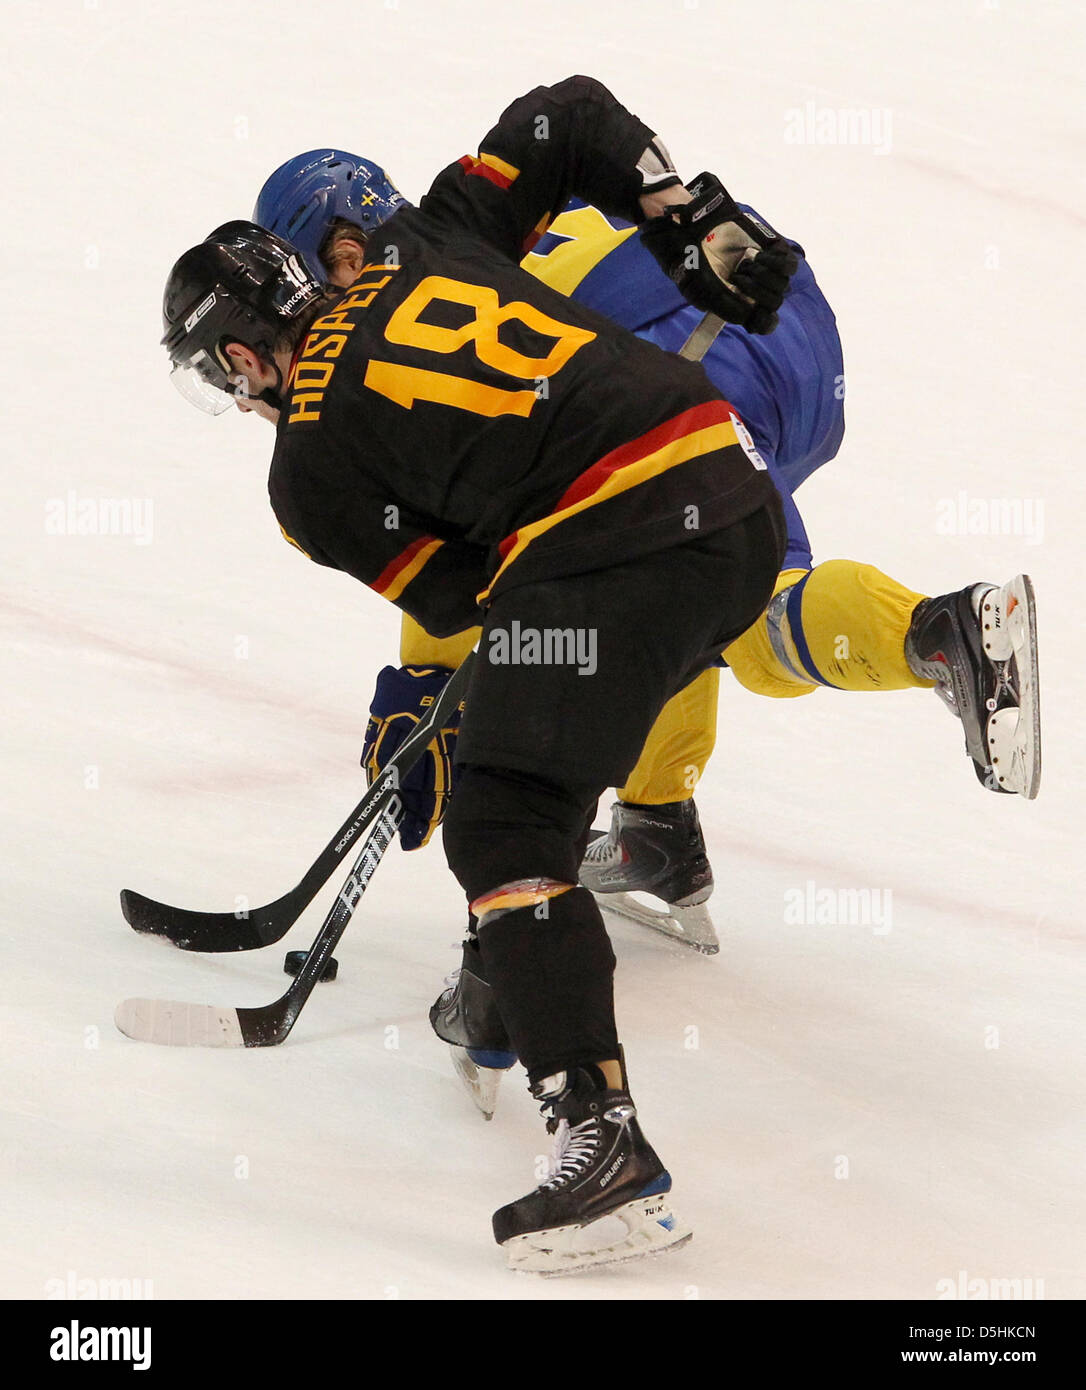 Andre Rankel (L) of Germany goes after the puck against Sweden player Tobias Enstrom during the Ice Hockey preliminary round at Canada Hockey Place during the Vancouver 2010 Olympic Games, in Vancouver, Canada, 17 February 2010. Sweden won 2-0. Photo: Daniel Karmann Stock Photo